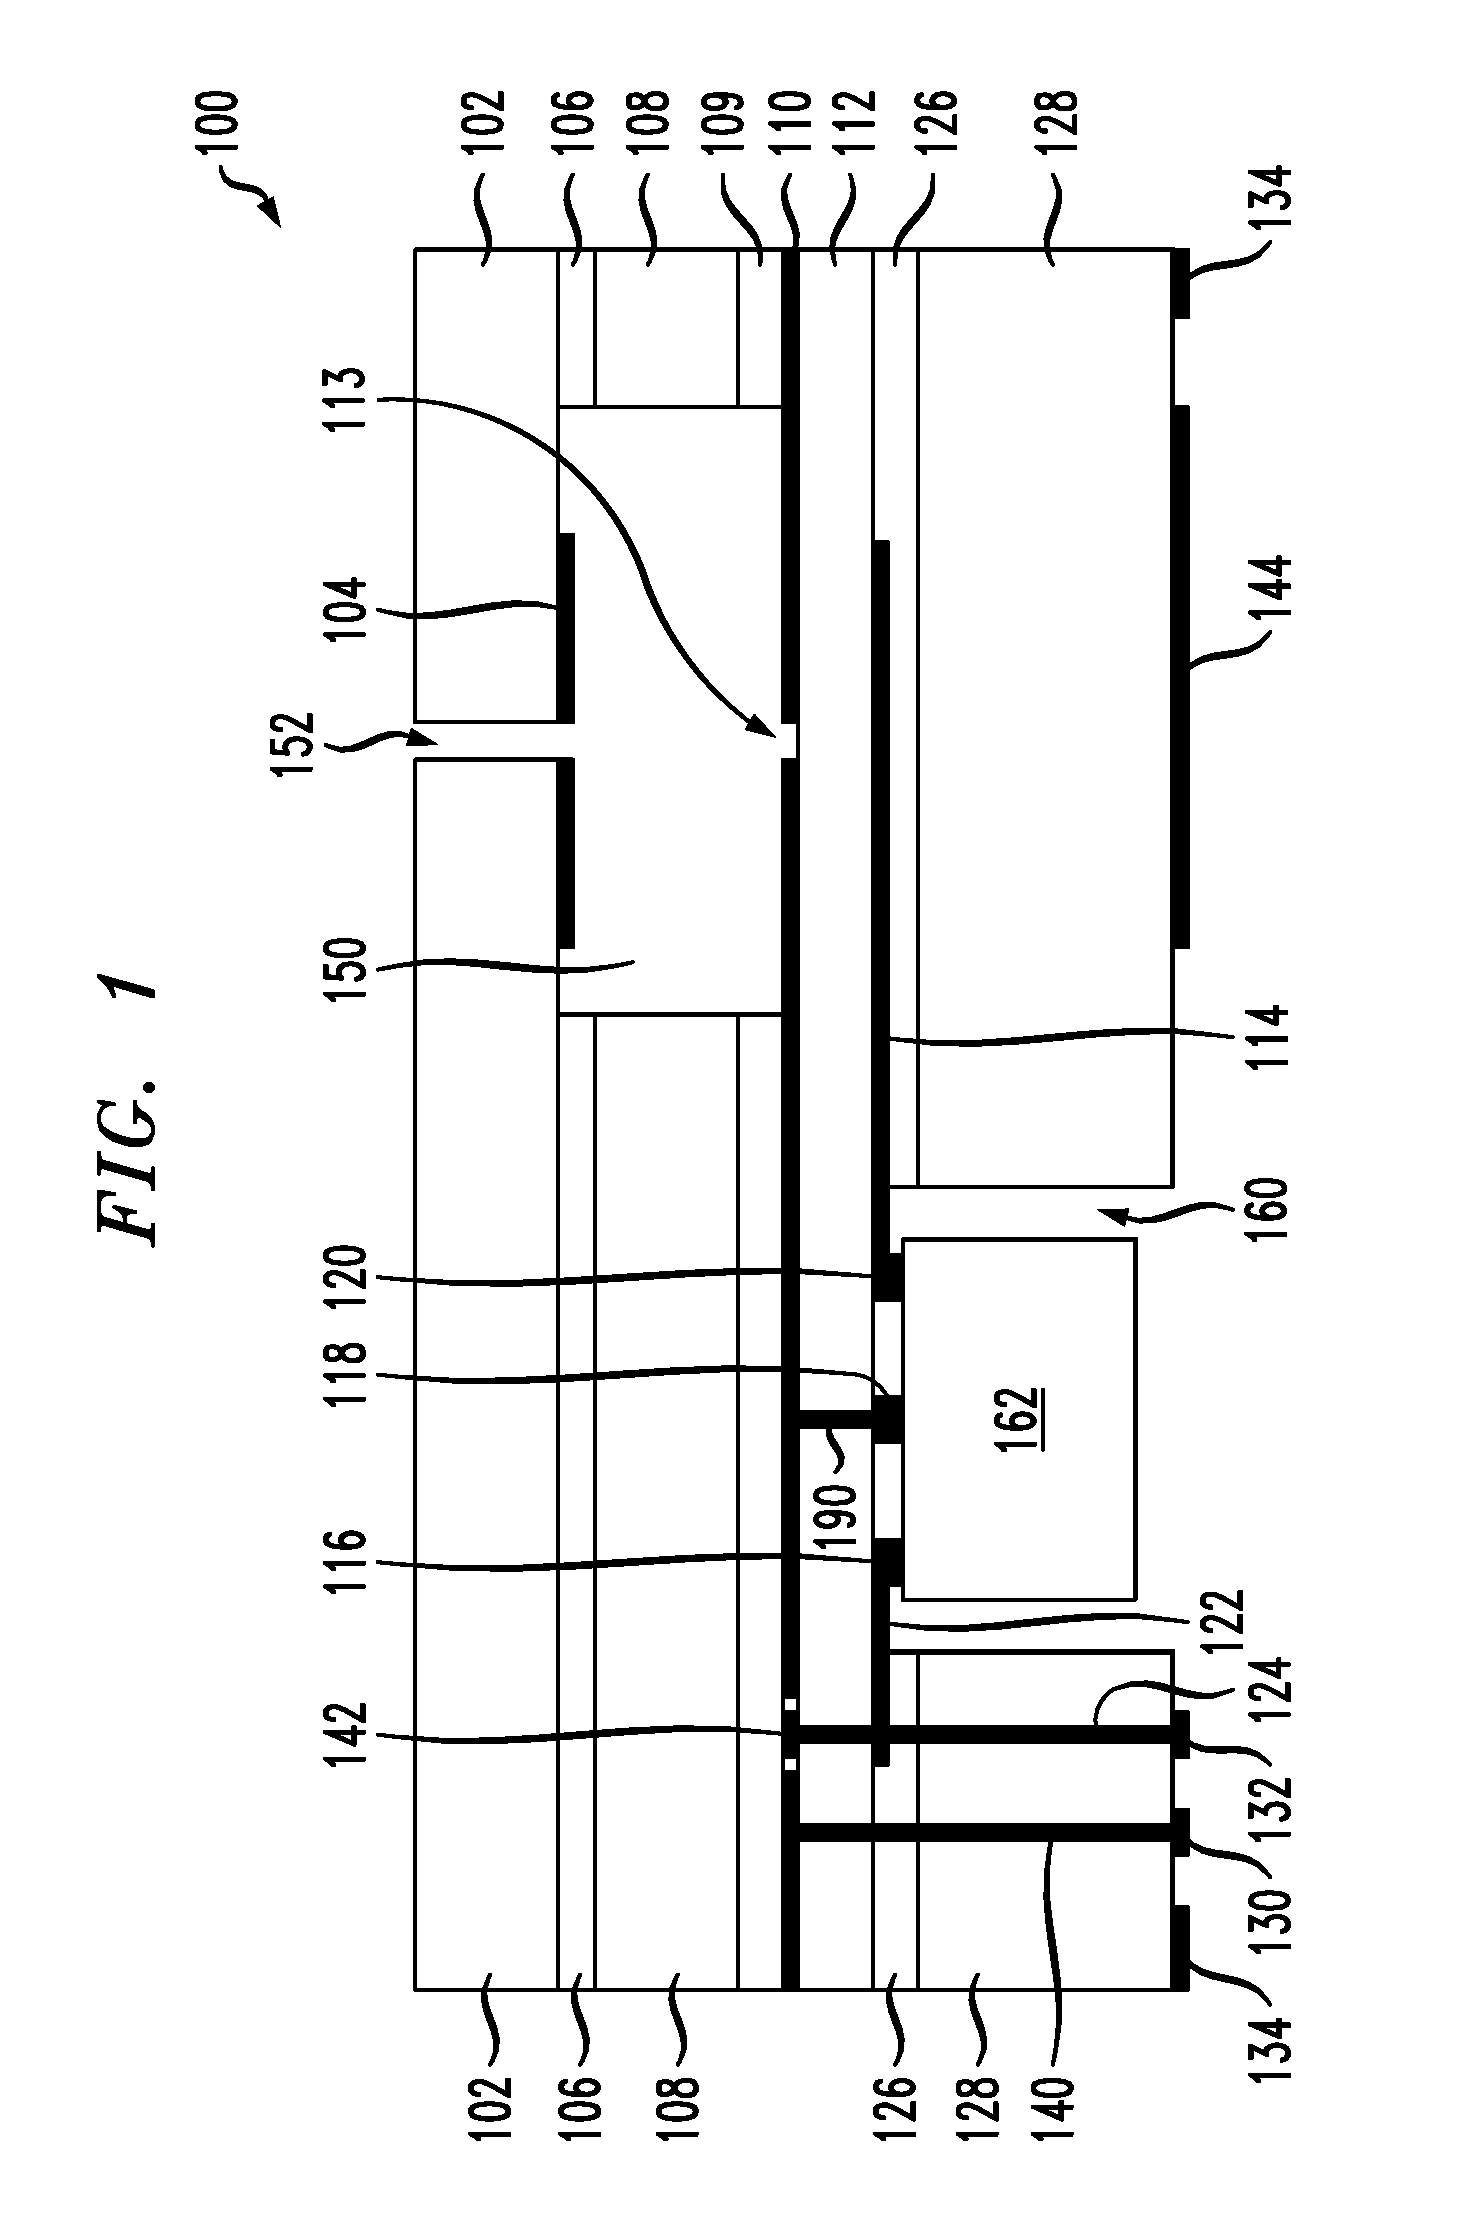 Radio frequency (RF) integrated circuit (IC) packages with integrated aperture-coupled patch antenna(s) in ring and/or offset cavities